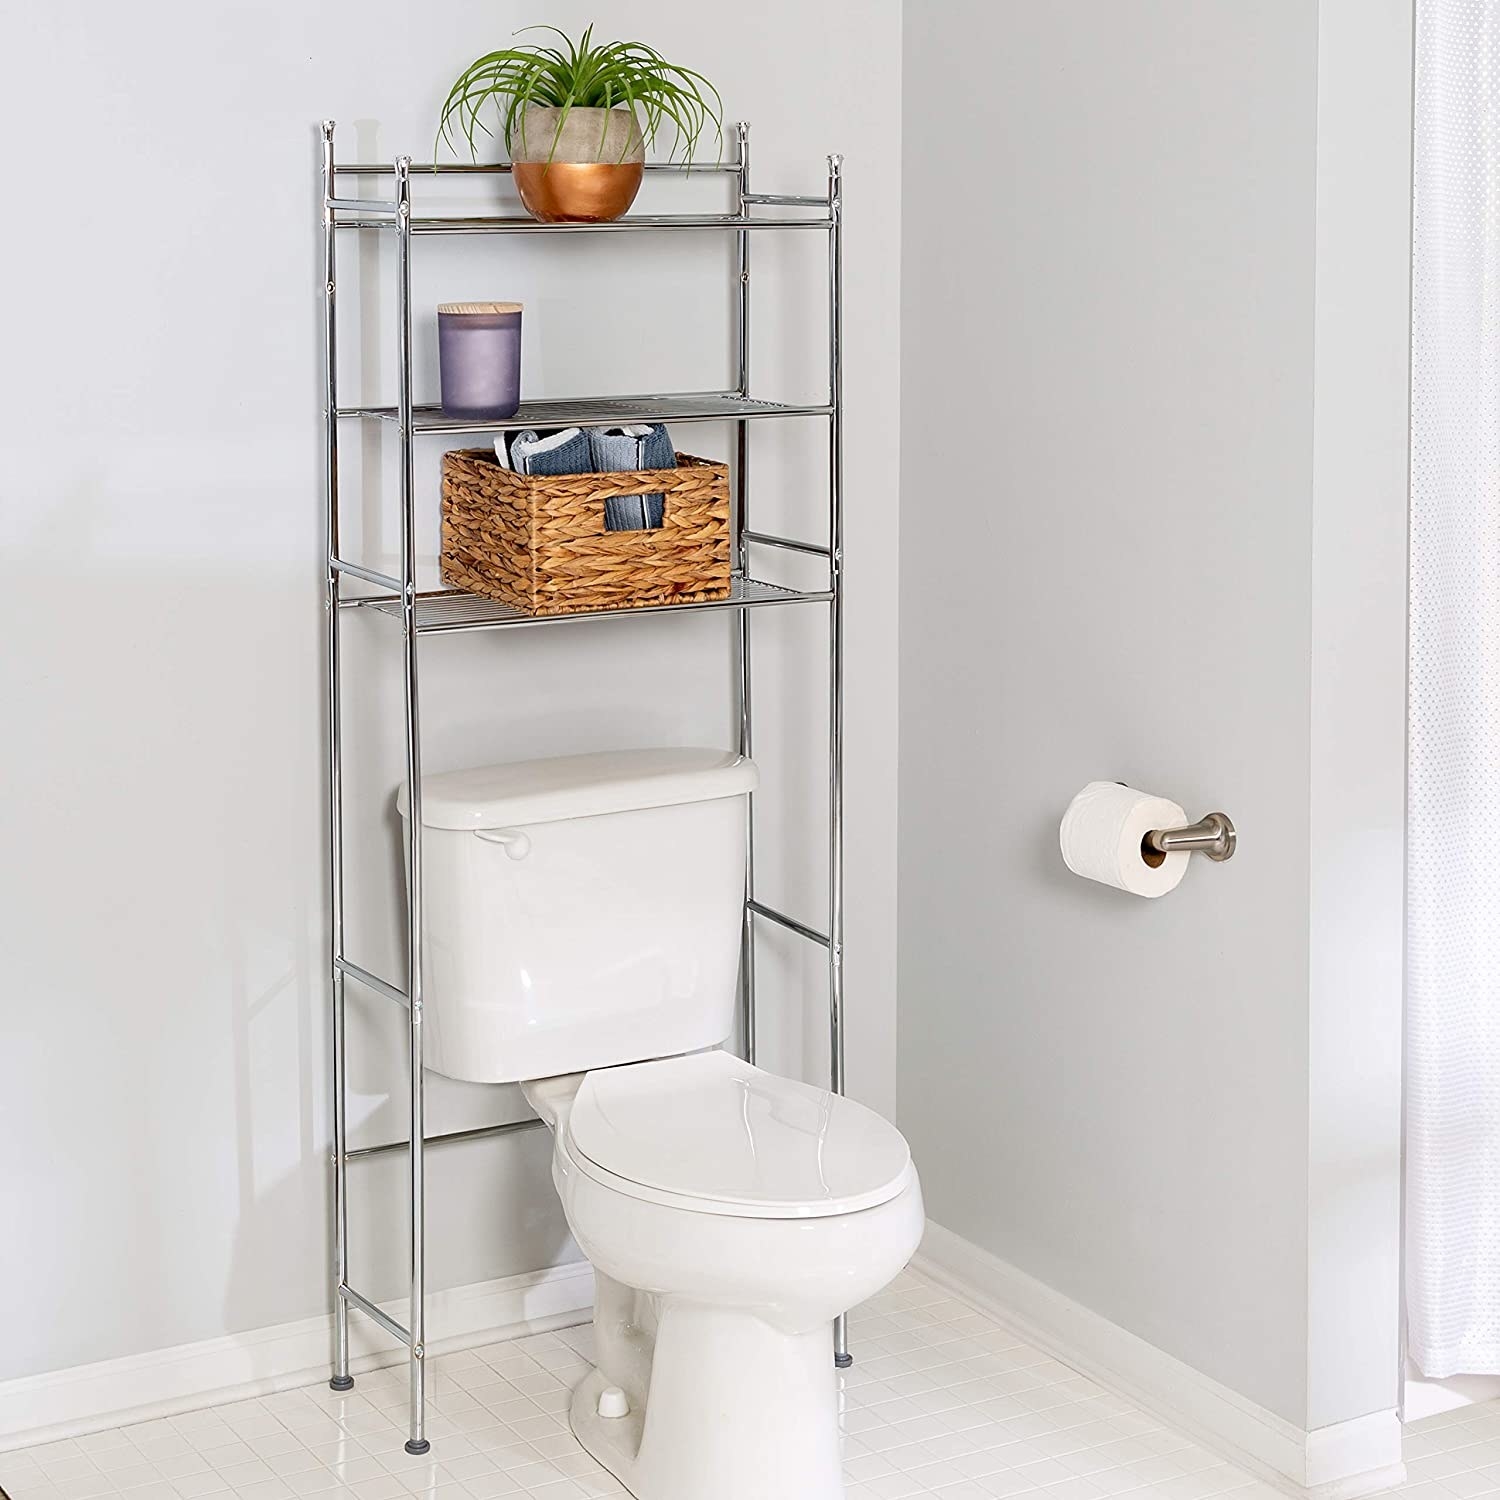 A multi-tiered shelf placed over a toilet The shelves are filled with beauty products aand toilet paper